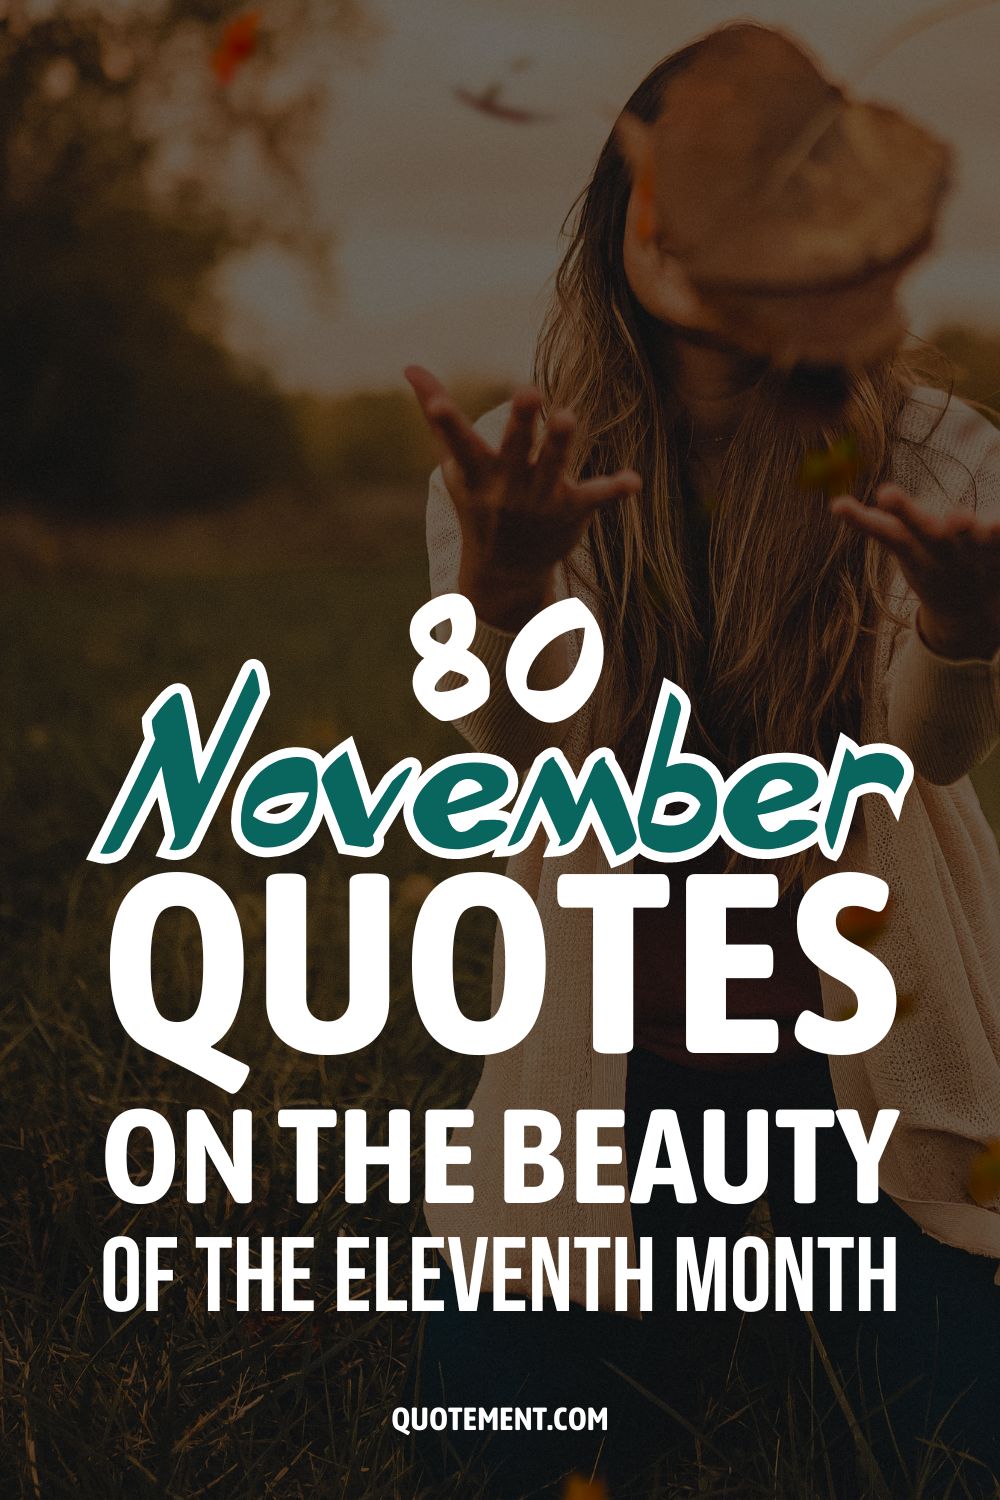 130 November Quotes On The Beauty Of The Eleventh Month
